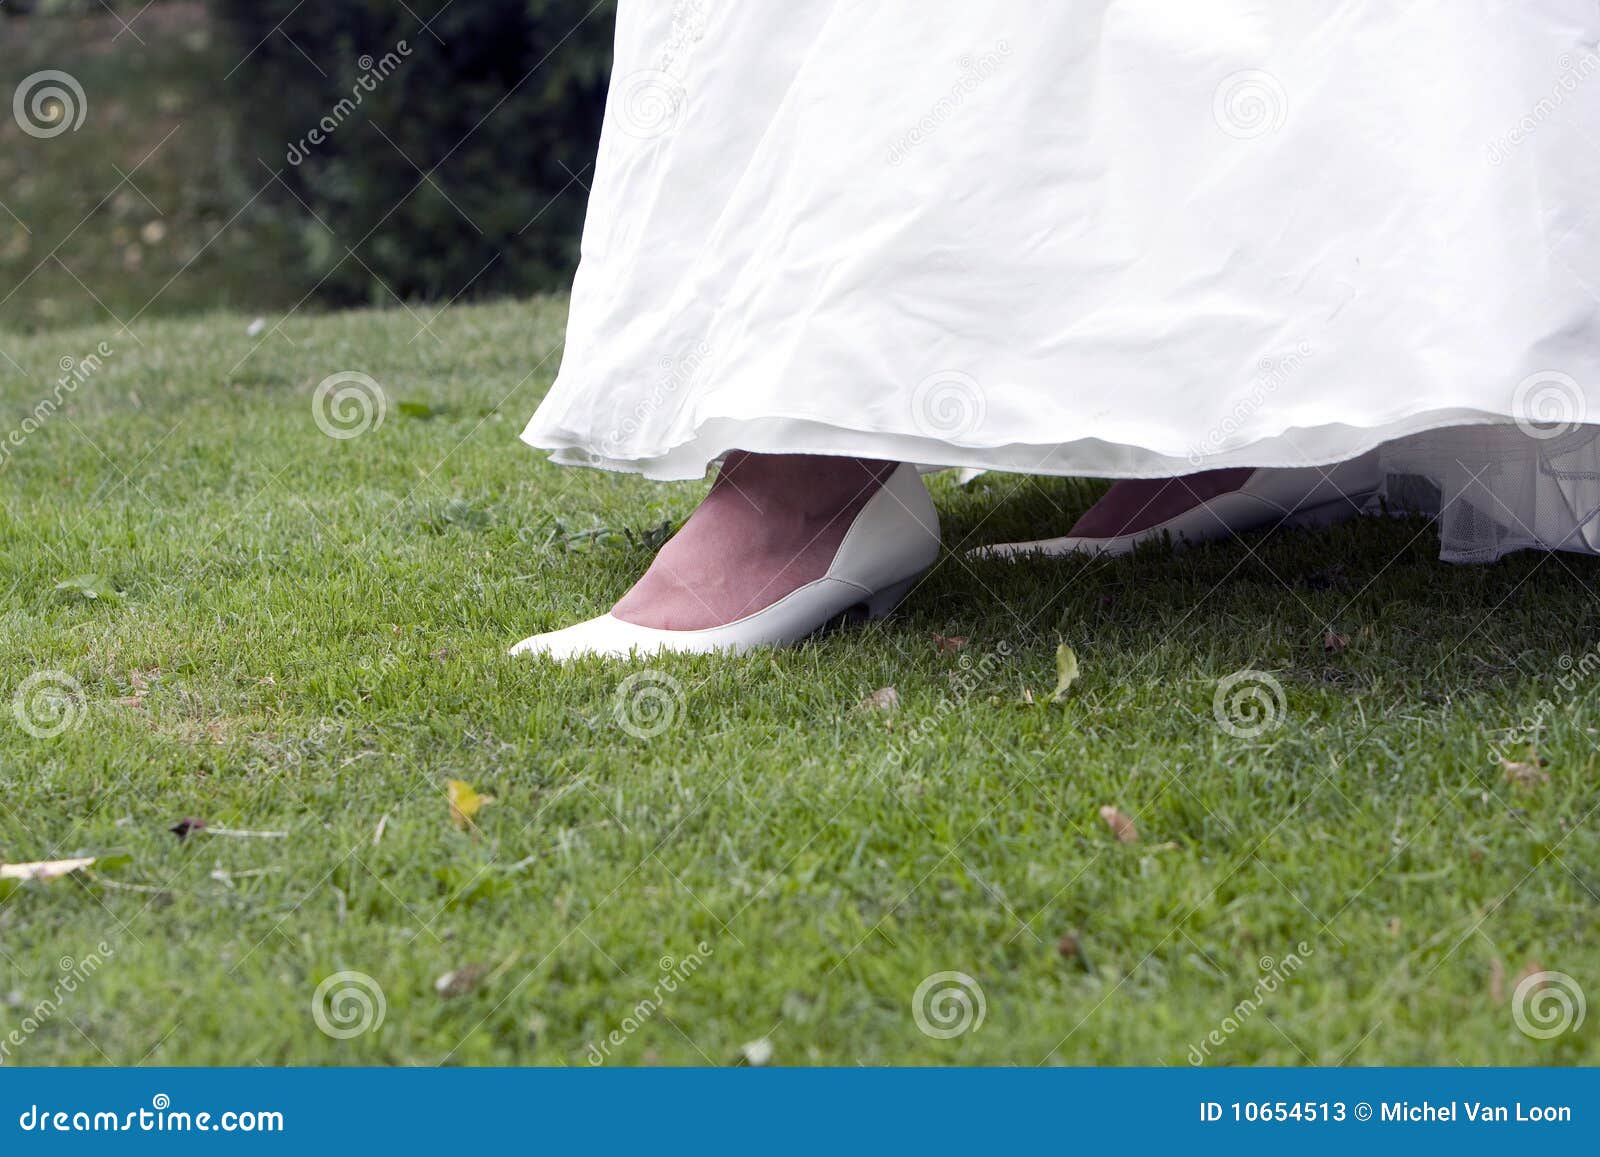 Brides feet stock image. Image of dress, special, wear - 10654513